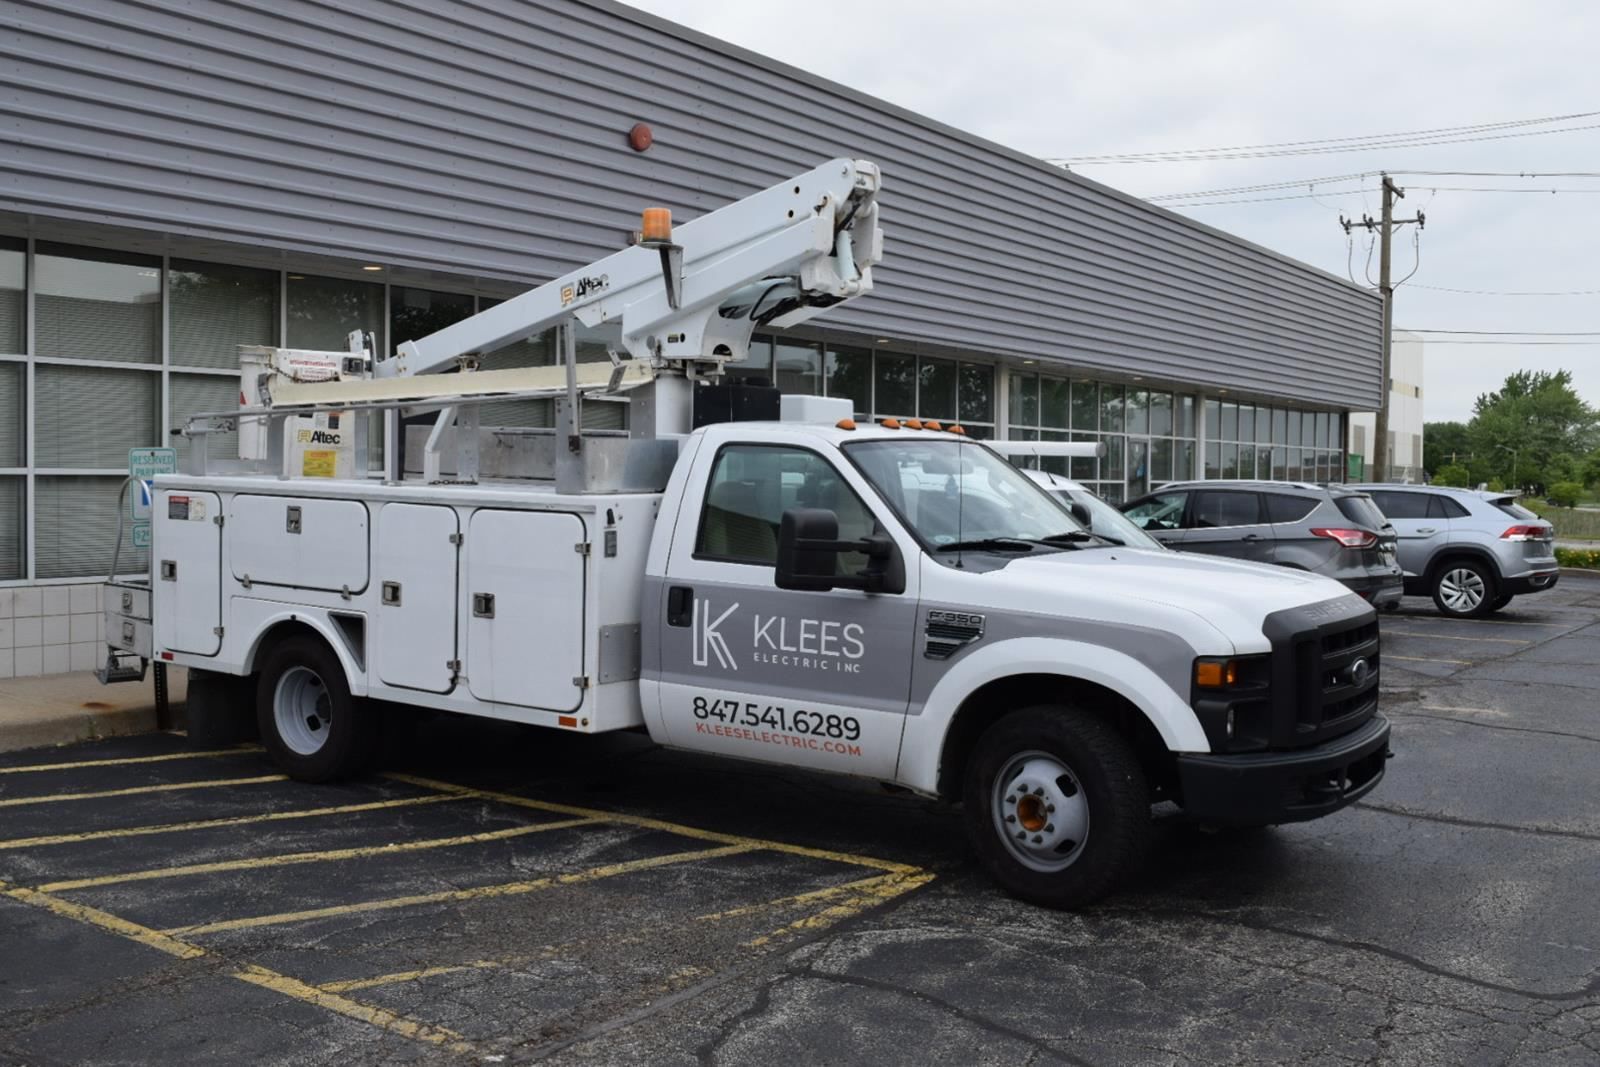 A white utility truck is parked in a parking lot in front of a building.